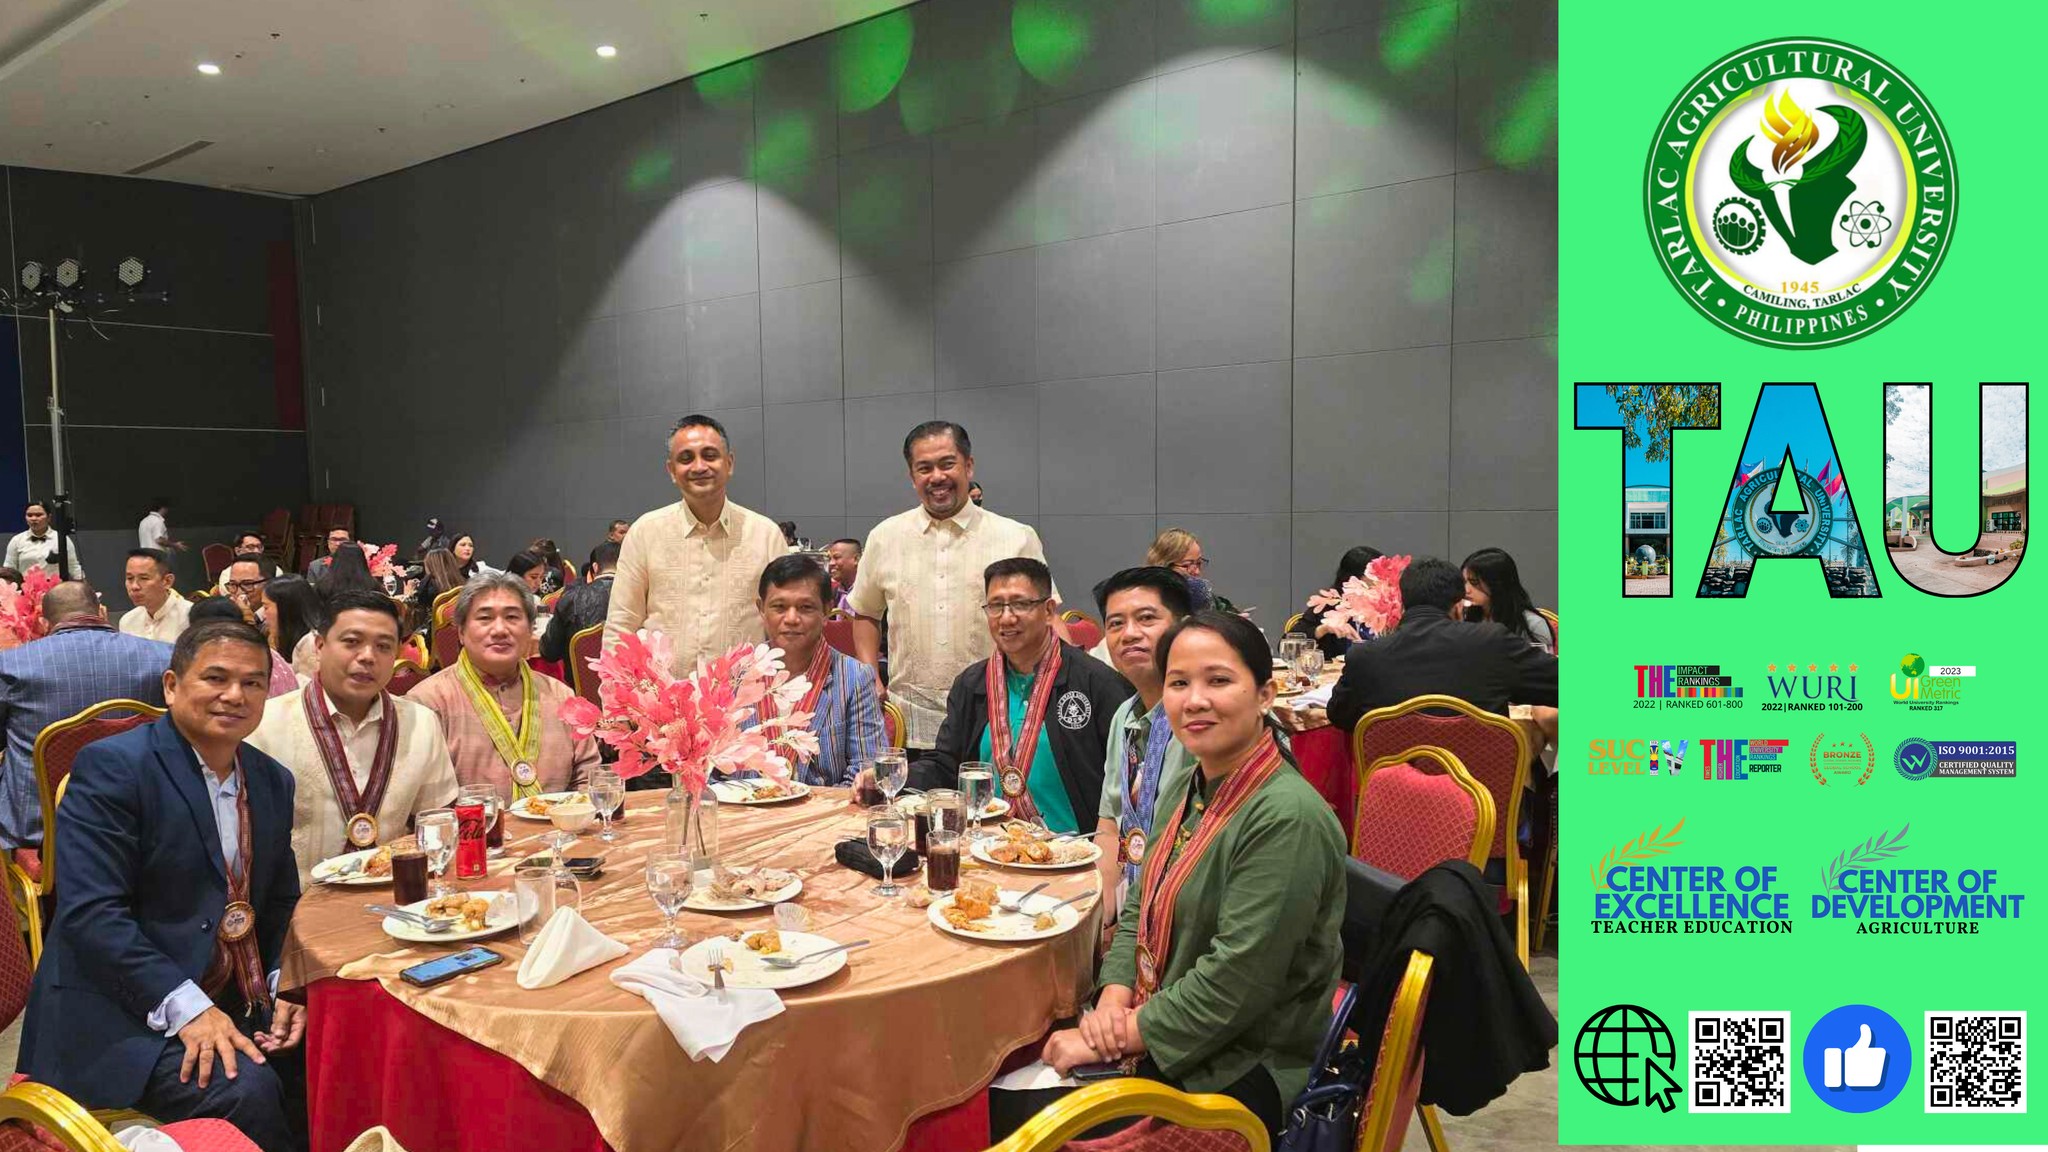 𝐂𝐀𝐏𝐓𝐔𝐑𝐄𝐃 𝐈𝐍 𝐋𝐄𝐍𝐒 | Dr. Silverio Ramon DC. Salunson, Tarlac Agricultural University (TAU) President, leads the TAU contingent in the 2024 State Universities and Colleges (SUC) Fair at Zamboanga City